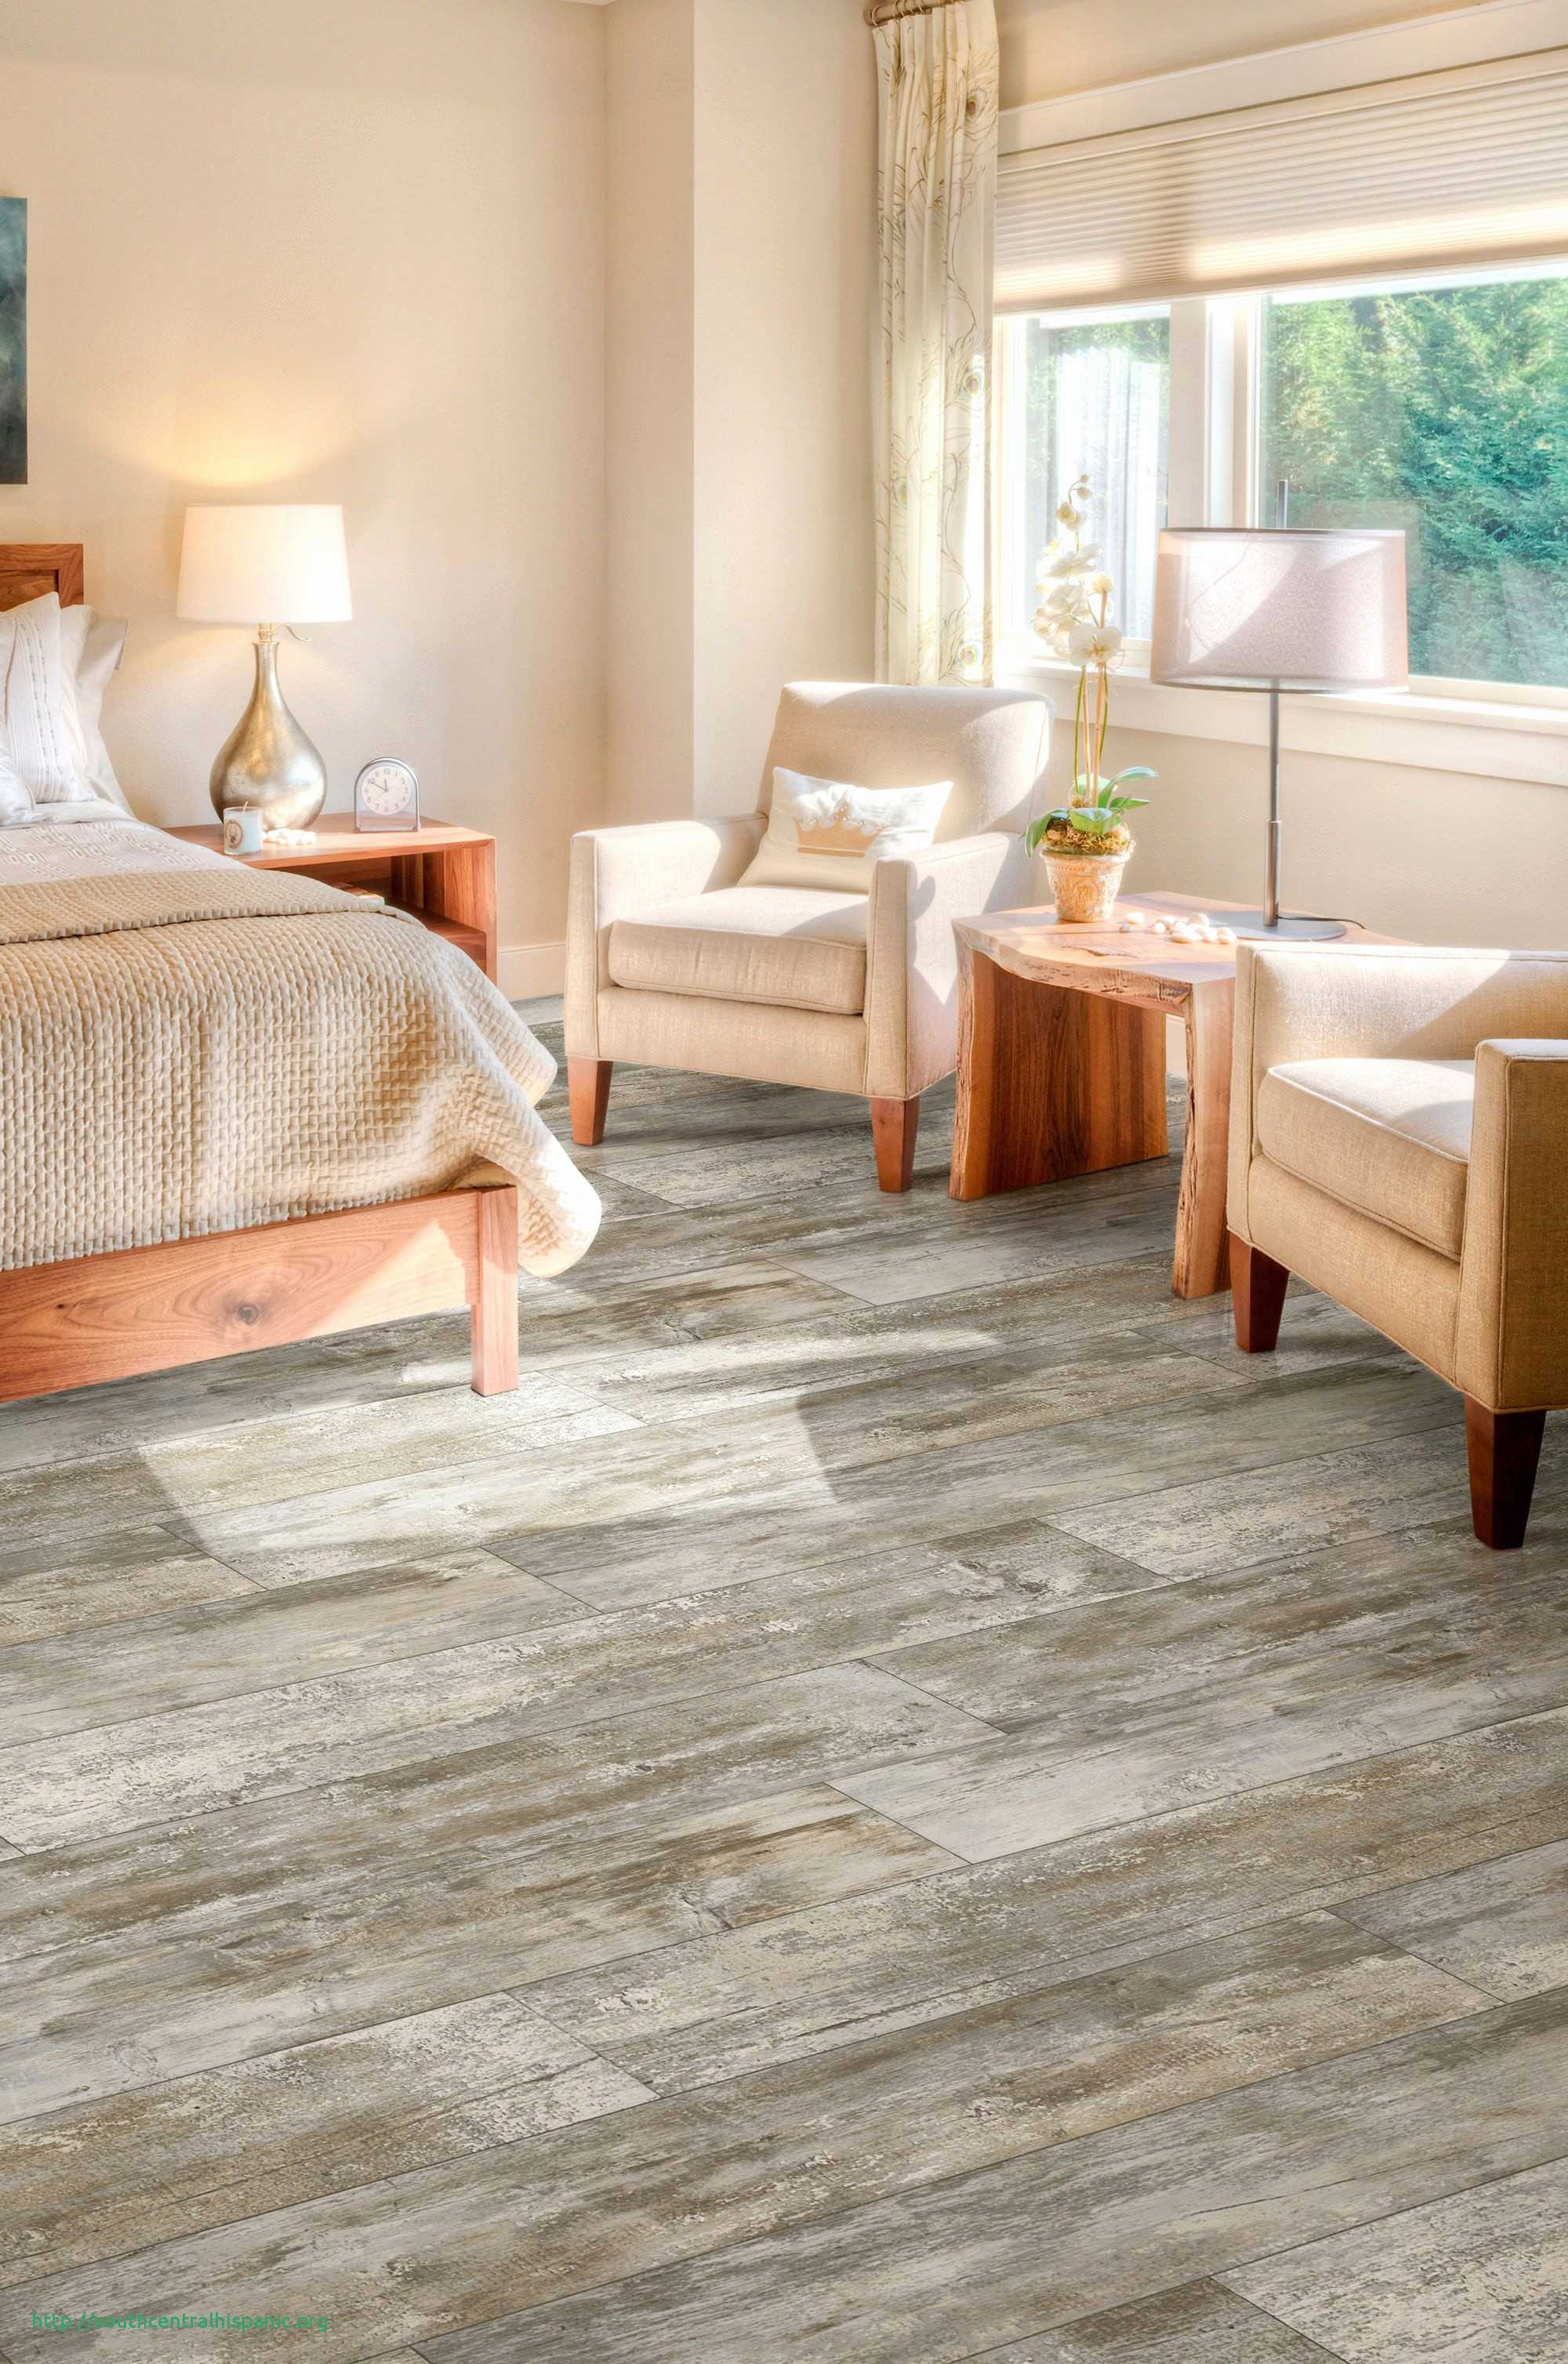 21 Wonderful Can I Put Hardwood Floor Over Tile 2024 free download can i put hardwood floor over tile of different types of flooring for bathrooms meilleur de gray subway pertaining to different types of flooring for bathrooms beau hardwood floor wood hardw